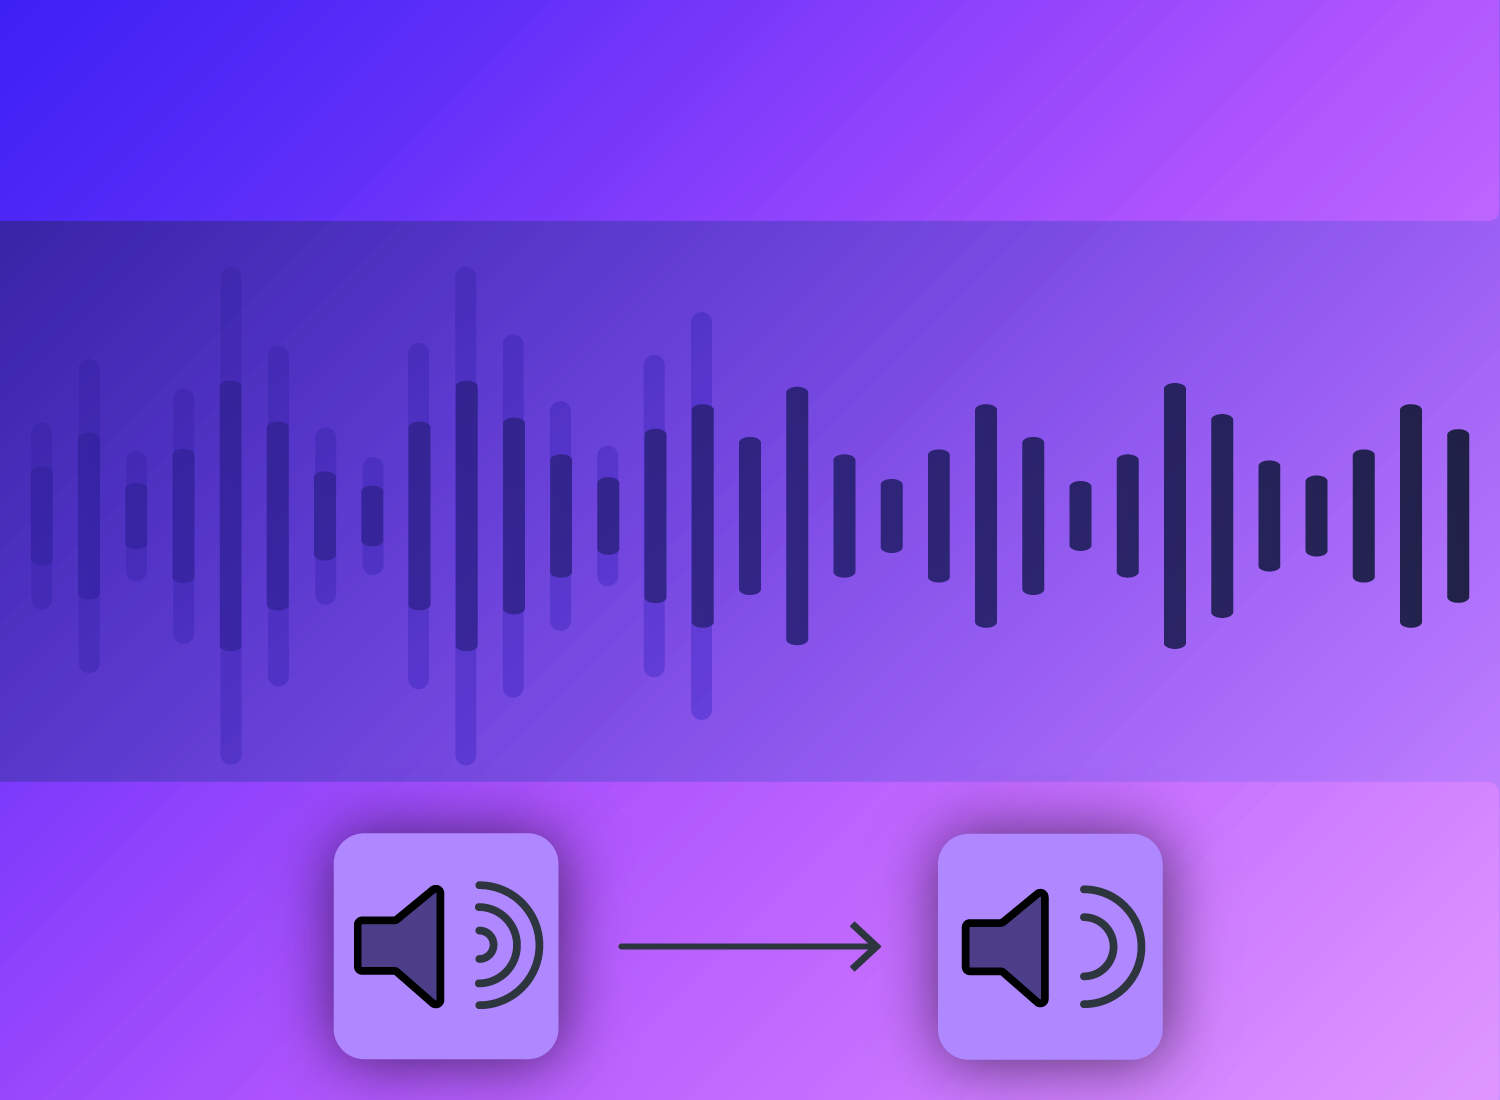 Graphic representation of audio editing, specifically the process of removing background noise. It features a sound wave pattern across the center against a gradient purple background, signifying audio frequency. Below the waveform, there are two icons: a speaker emitting sund waves and another with a line through it, connected by an arrow pointing right, symbolizing the transformation from noisy to clean audio. This image is suitable for educational content about audio editing techniques and sound engineering.